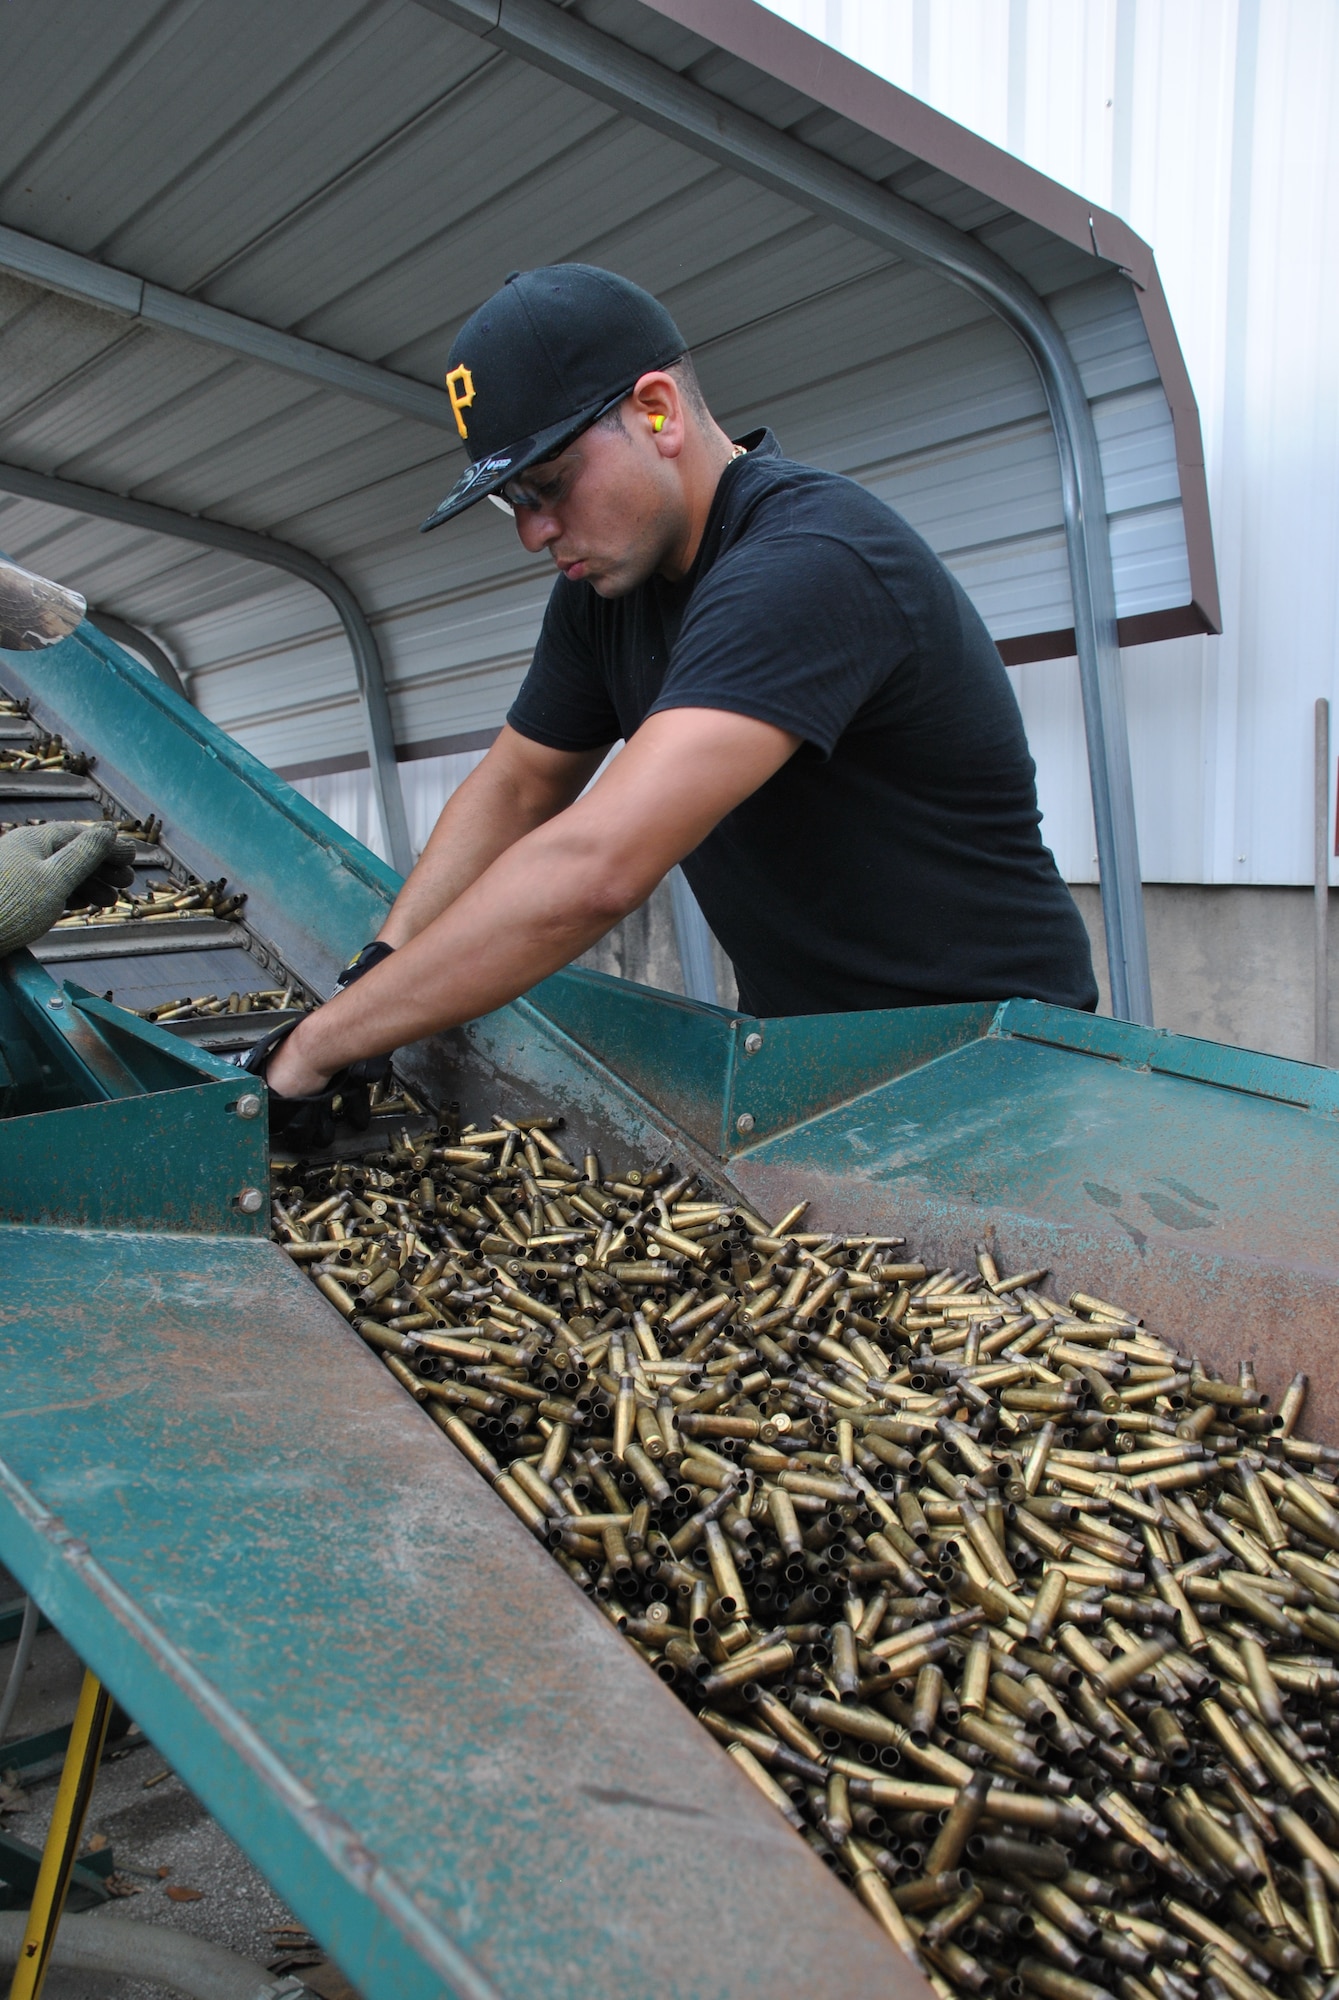 A Joint Base San Antonio-Lackland Recycling Center worker examines ammunition brass as part of the base’s recycling effort. The installation operates a zero-cost recycling program, with recycling proceeds used to pay worker salaries and the facility’s operating and maintenance costs. (U.S. Air Force photo/Jennifer Schneider/Released)